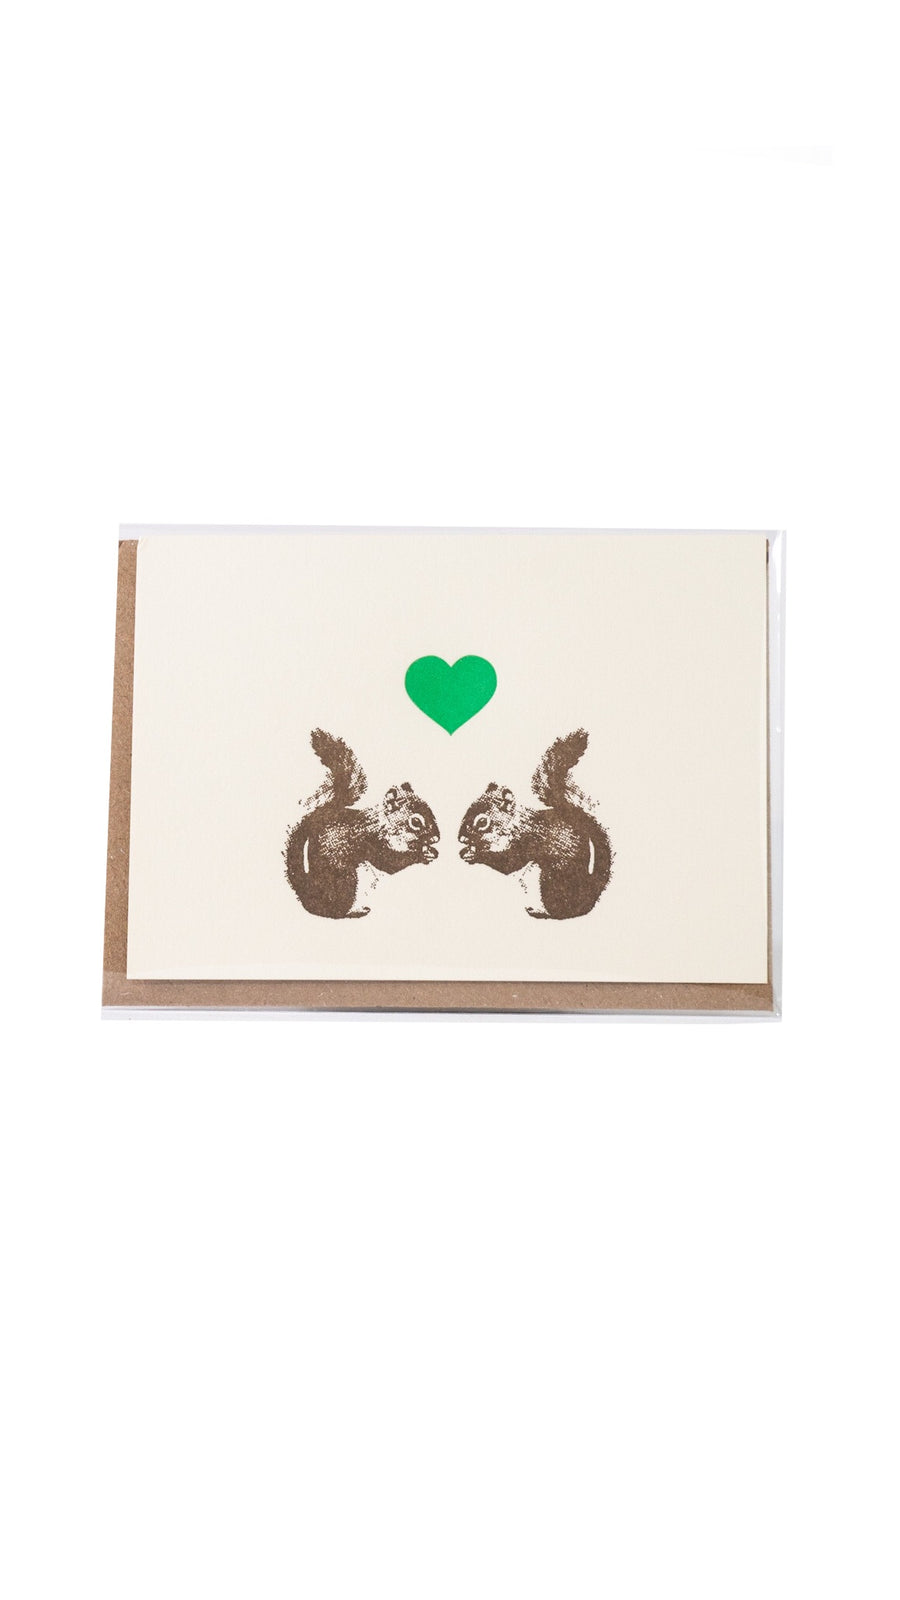 Squirrels Dining Out Card by Lark Press